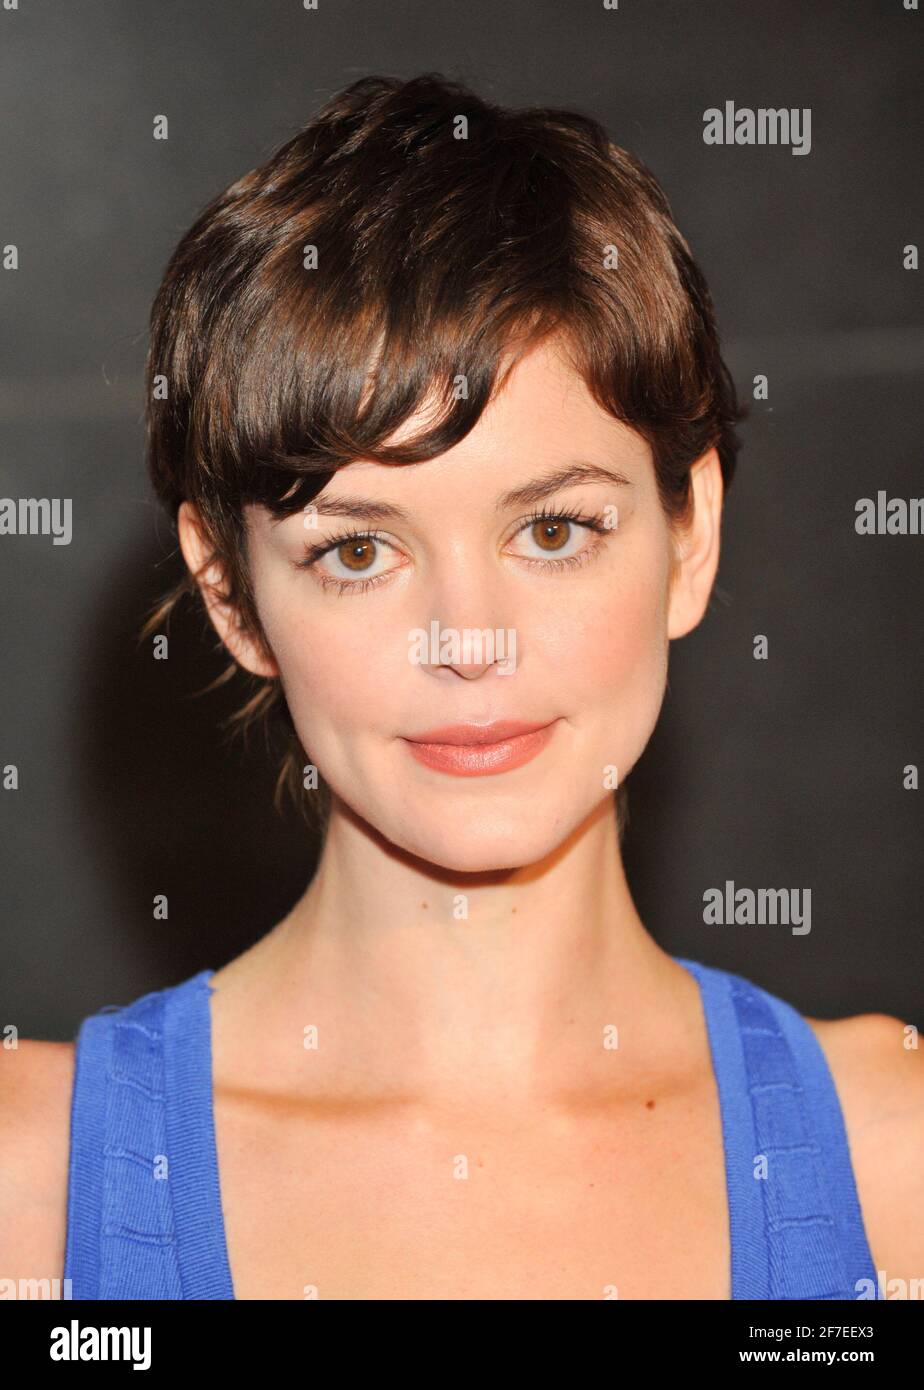 Actress Nora Zehetner attends arrivals for the 6th annual Teen Vogue Young Hollywood Party at Los Angeles County Museum of Art on September 18, 2008 in Los Angeles, California. Credtit: Jared Milgrim Stock Photo